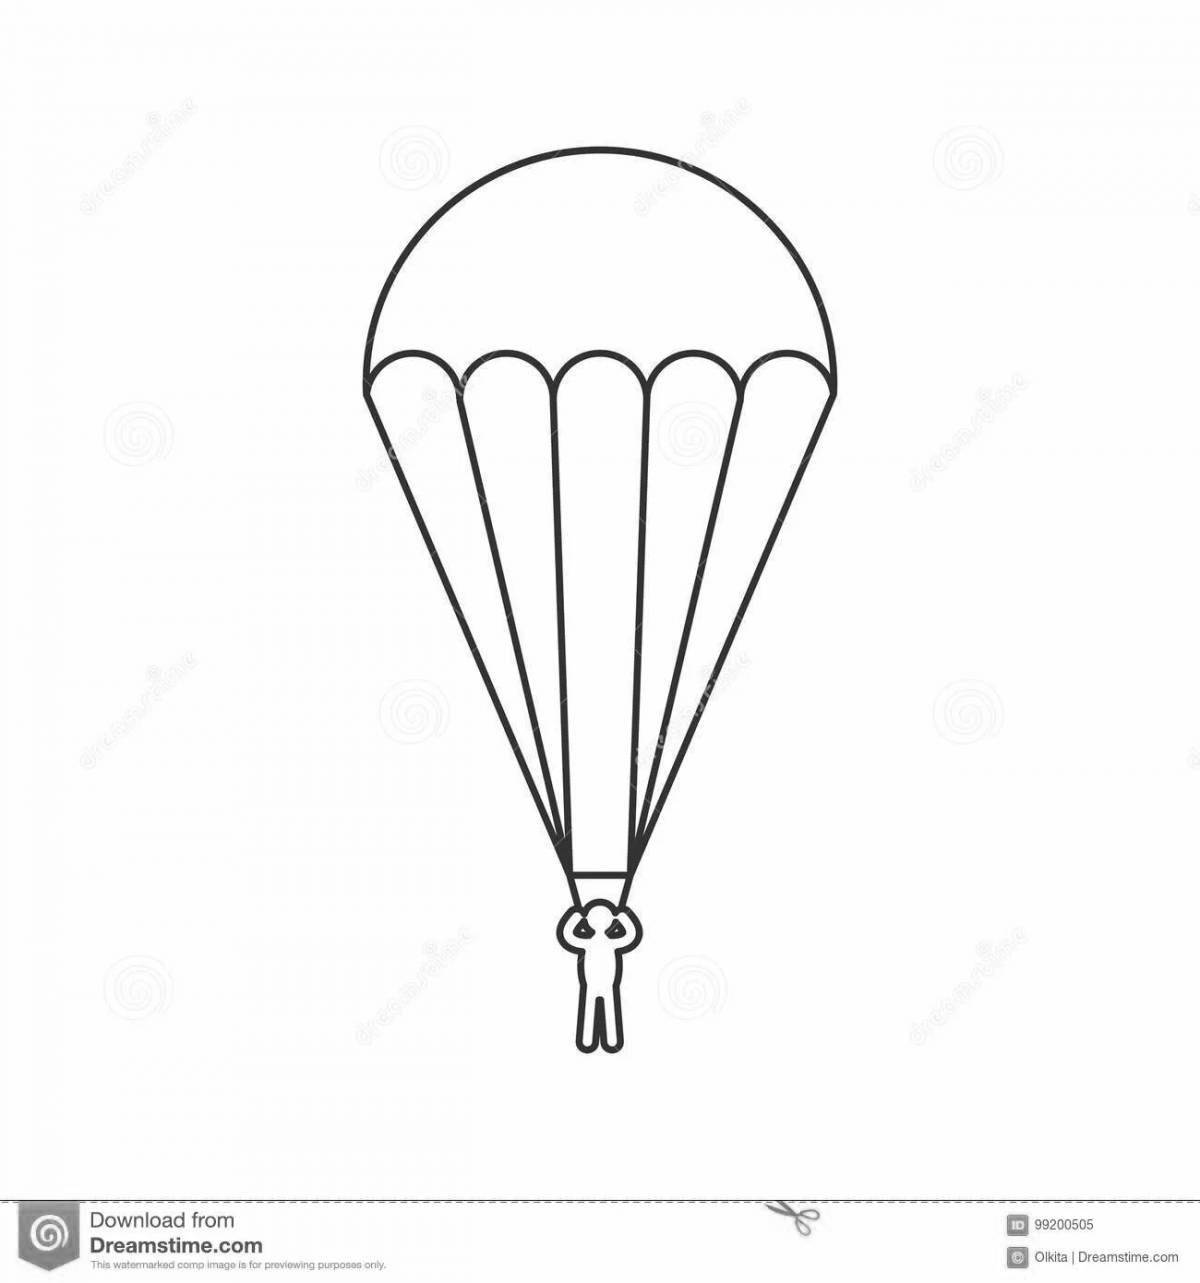 Jovial parachute coloring book for toddlers